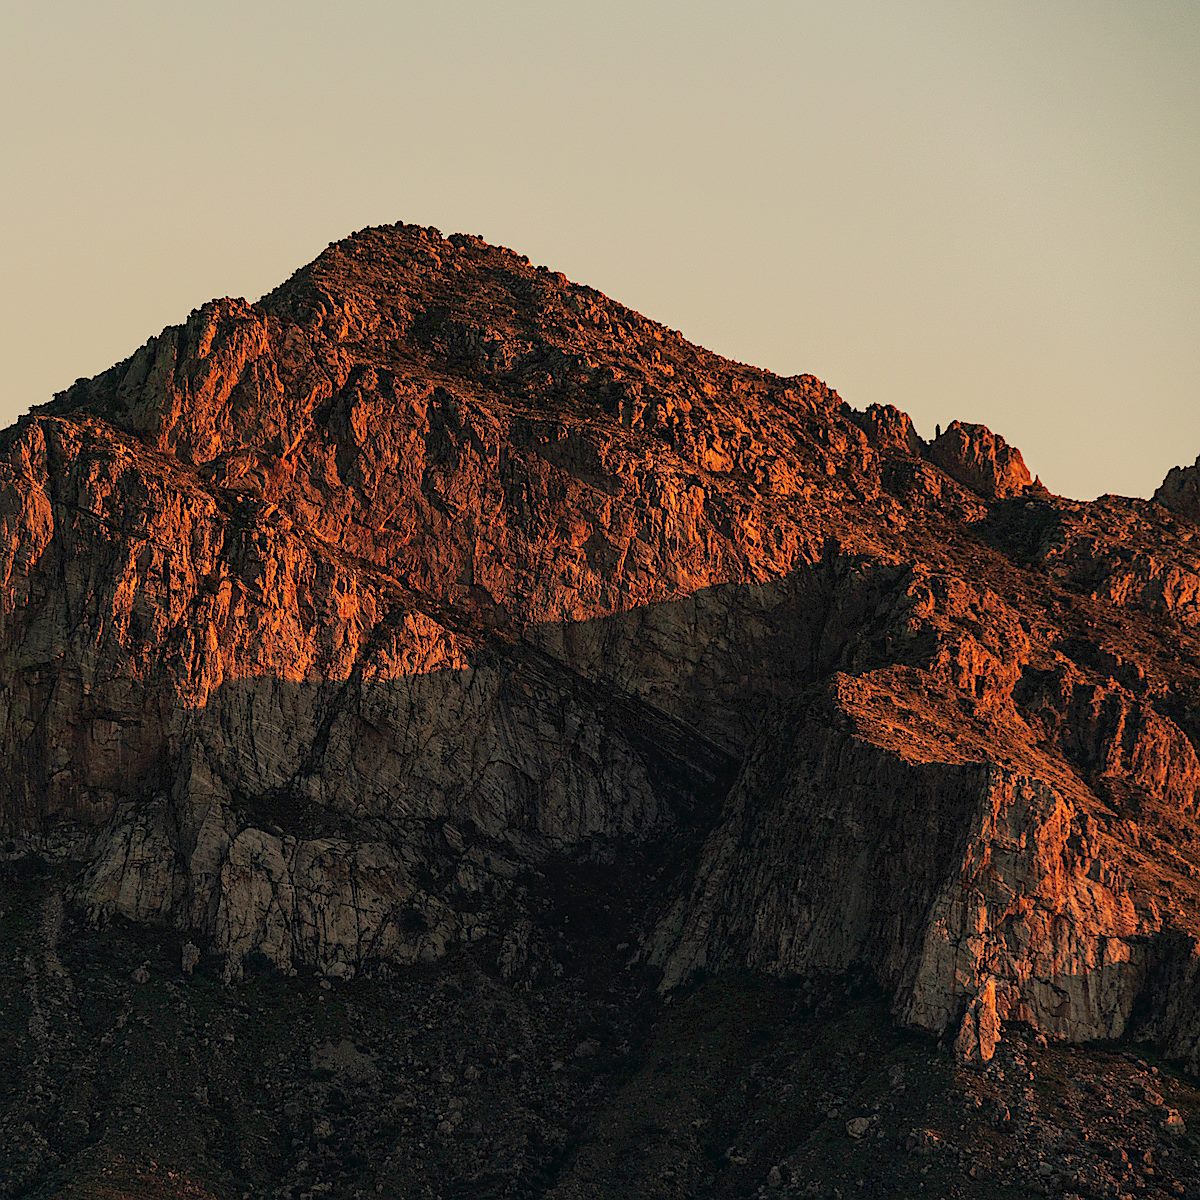 Pusch Peak from Naranja Park in Oro Valley. January 2019.